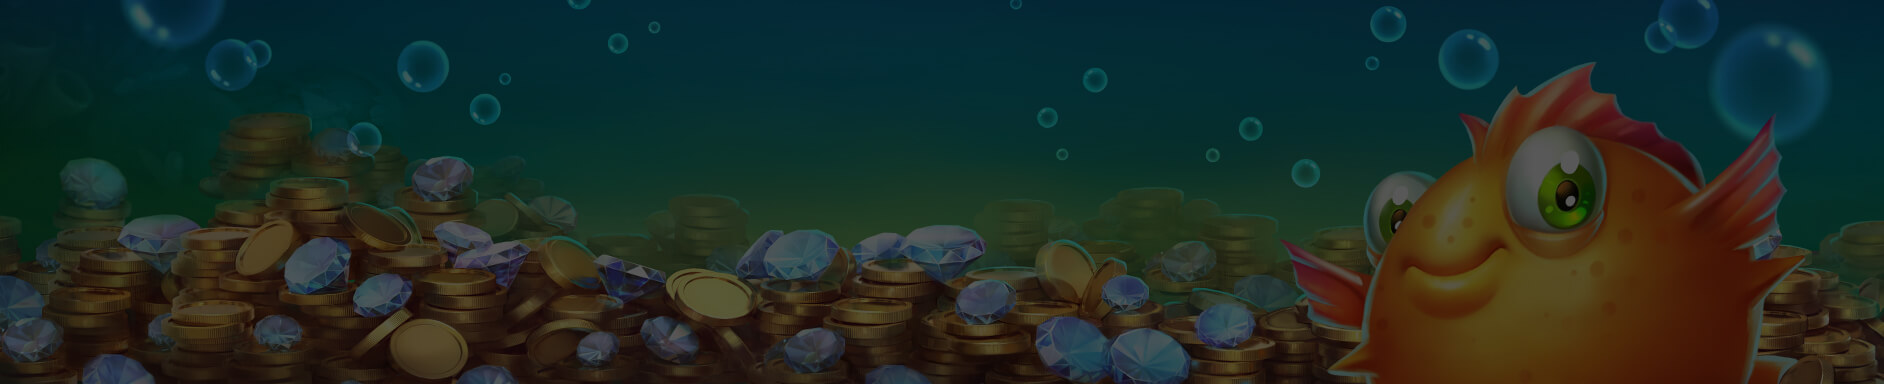 Fishing Kingdom fish arcade game release by NetGame